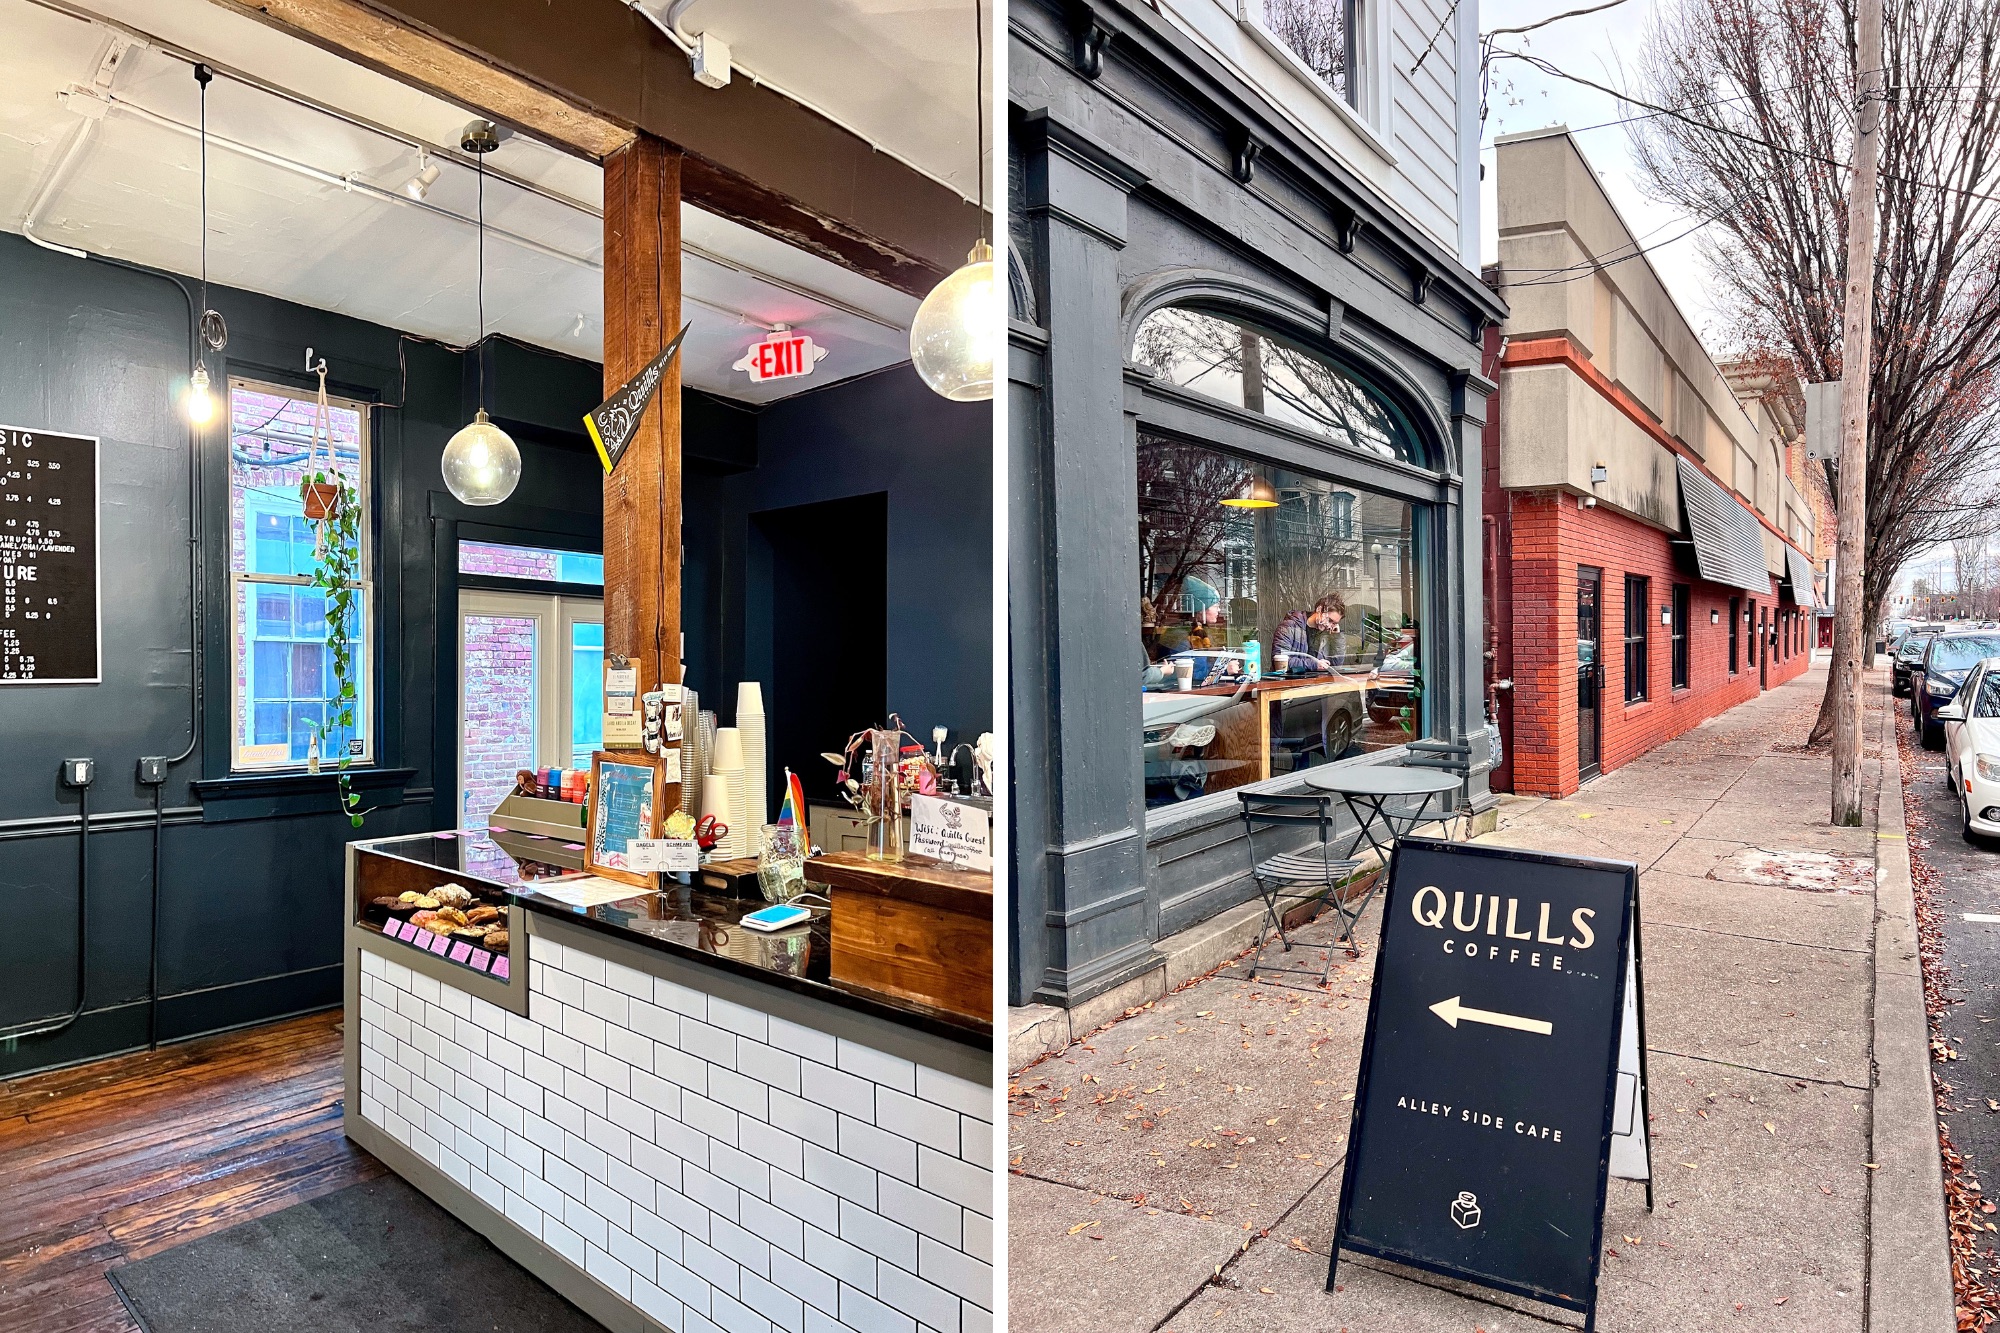 Exterior and Interior of Quills Coffee